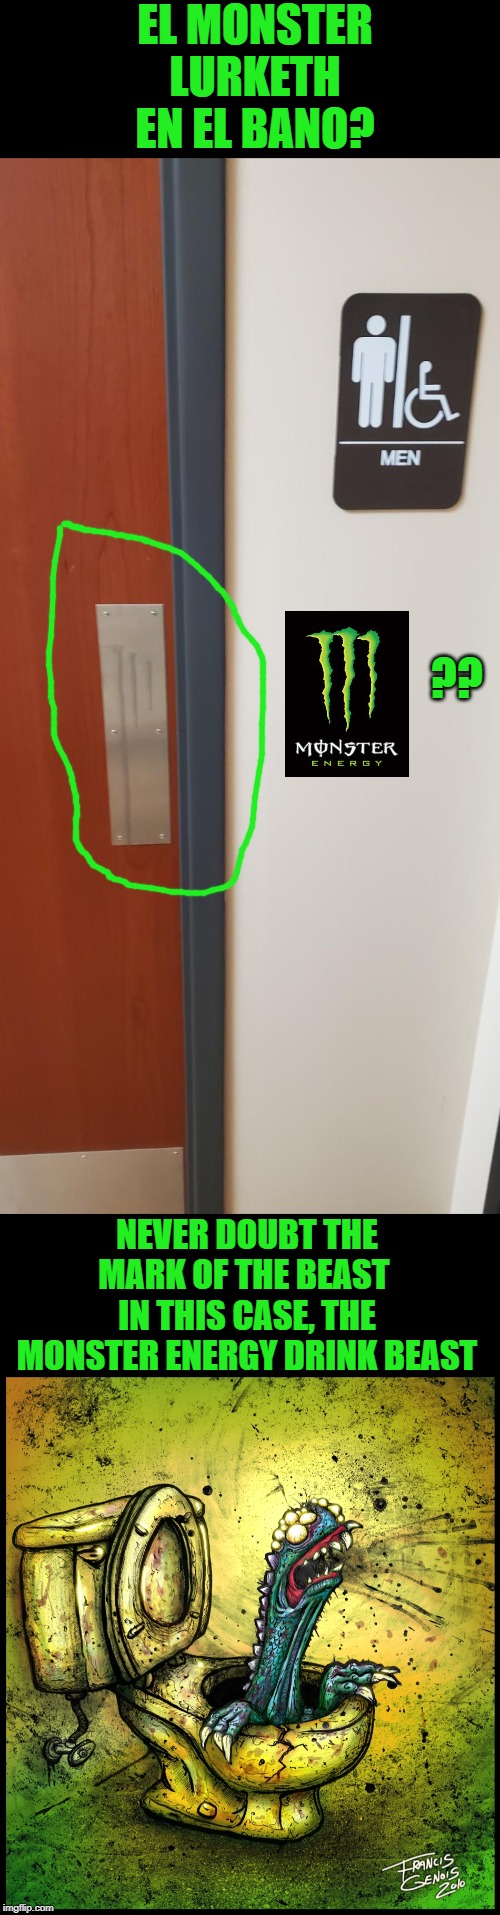 WHEN YOU SEE THE MARK OF THE BEAST, ENTER AT YOUR OWN PERIL!!!! | EL MONSTER LURKETH EN EL BANO? ?? NEVER DOUBT THE MARK OF THE BEAST  IN THIS CASE, THE MONSTER ENERGY DRINK BEAST | image tagged in monster,monsters,energy drinks,toilet,bathroom humor,bathroom | made w/ Imgflip meme maker